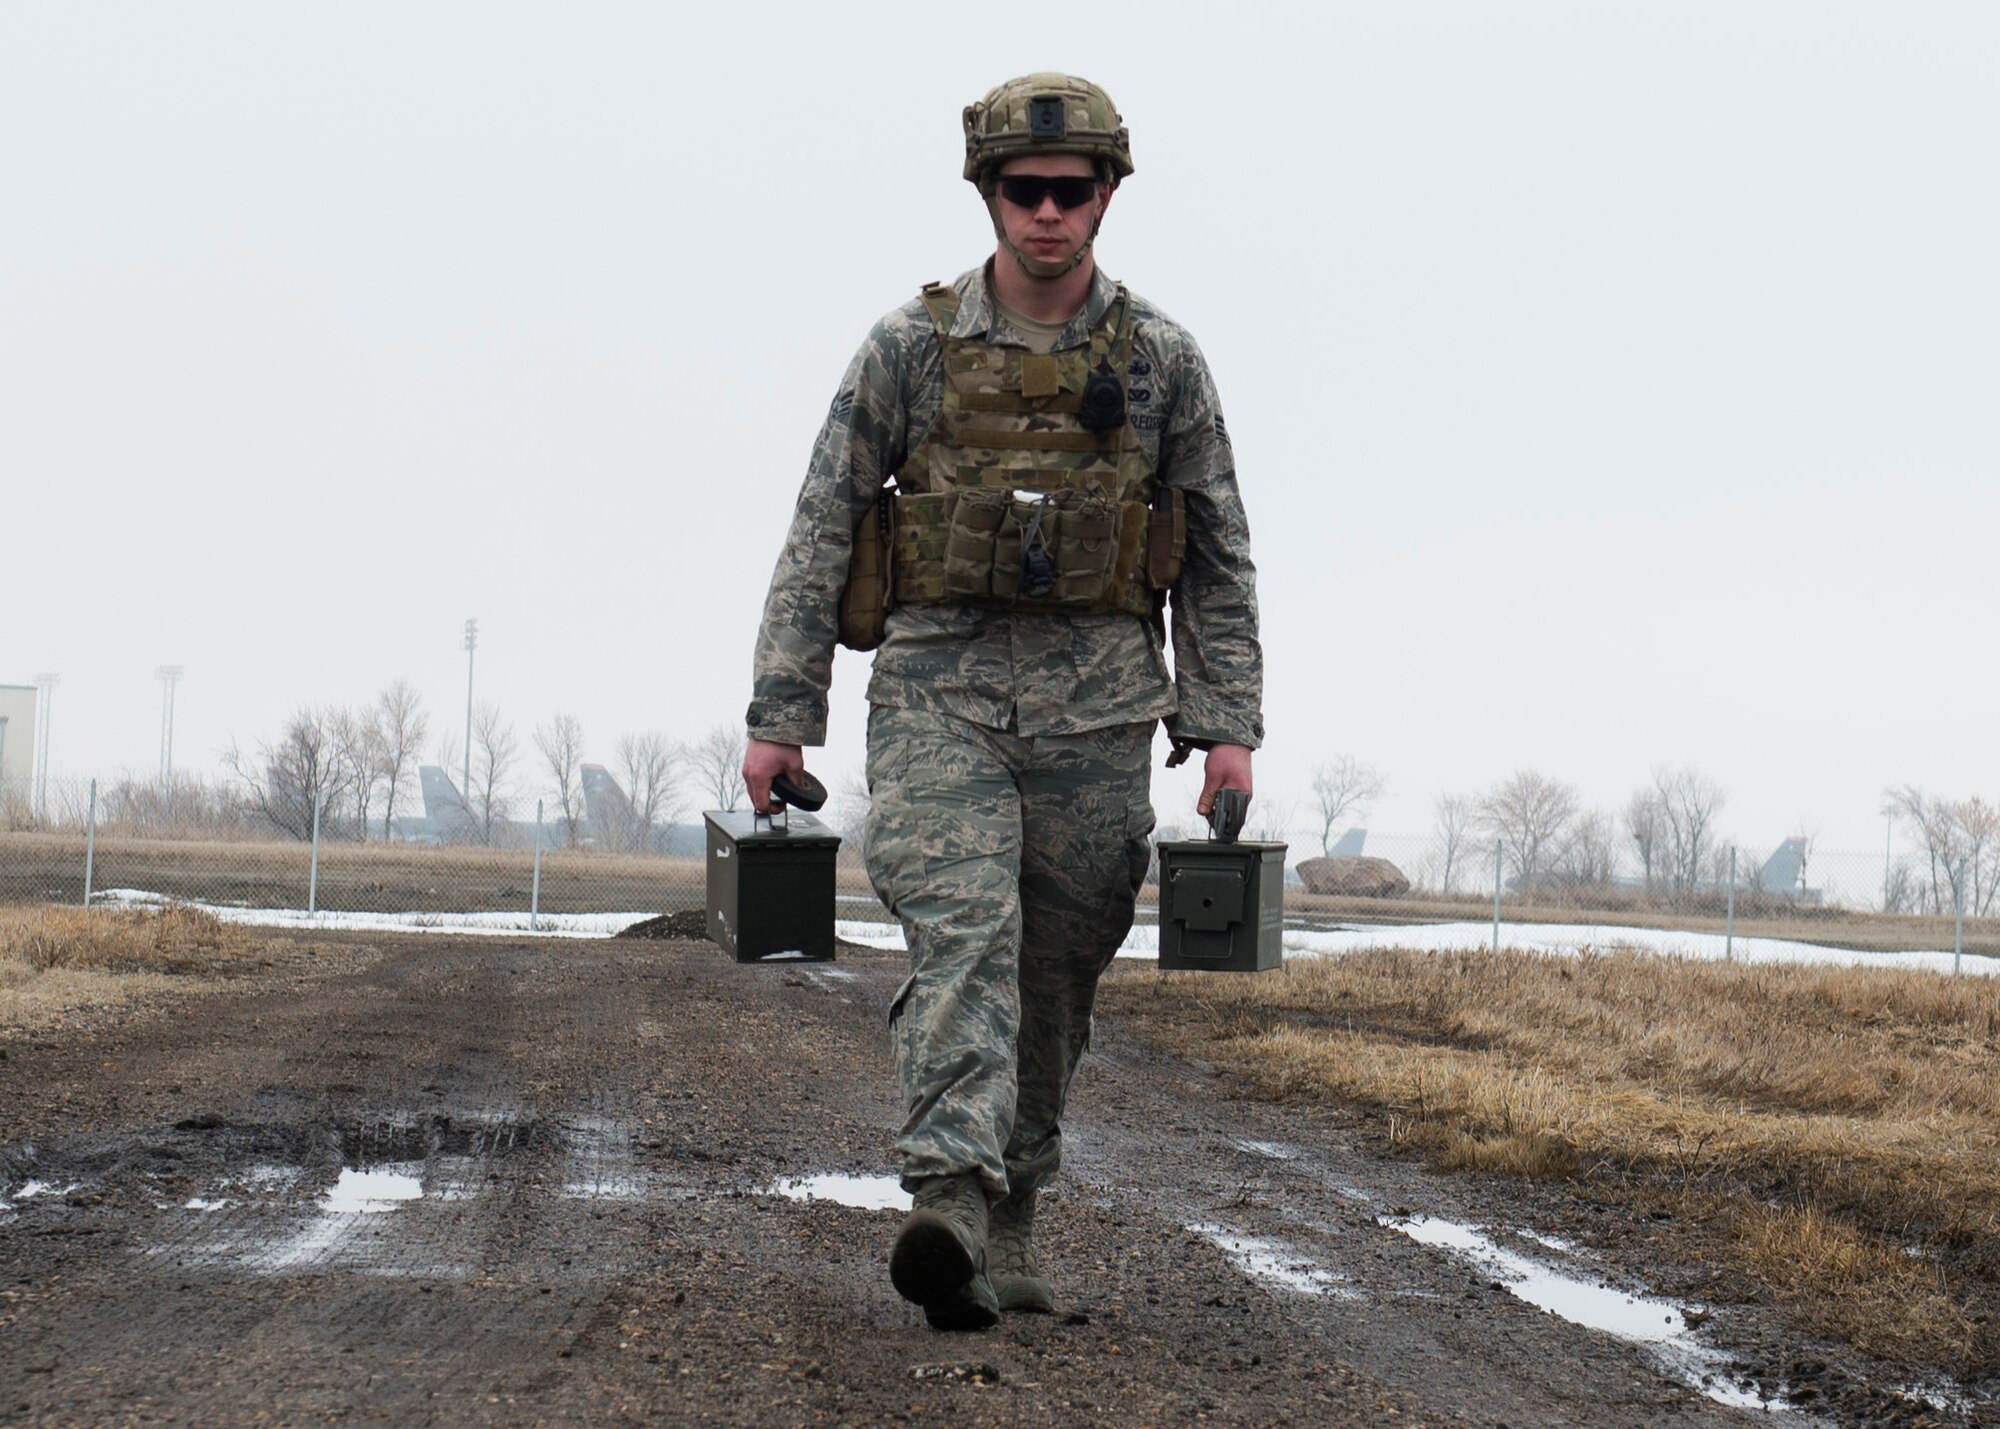 Senior Airman Adam Allen, 5th Civil Engineer Squadron explosive ordnance disposal team leader, carries ammunition cans at Minot Air Force Base, N.D., March 28, 2017. During training, EOD Airmen practiced safely securing inert unexploded ordnance parts to ensure the safety of personnel transporting a UXO. (U.S. Air Force photo/Airman 1st Class Alyssa M. Akers)